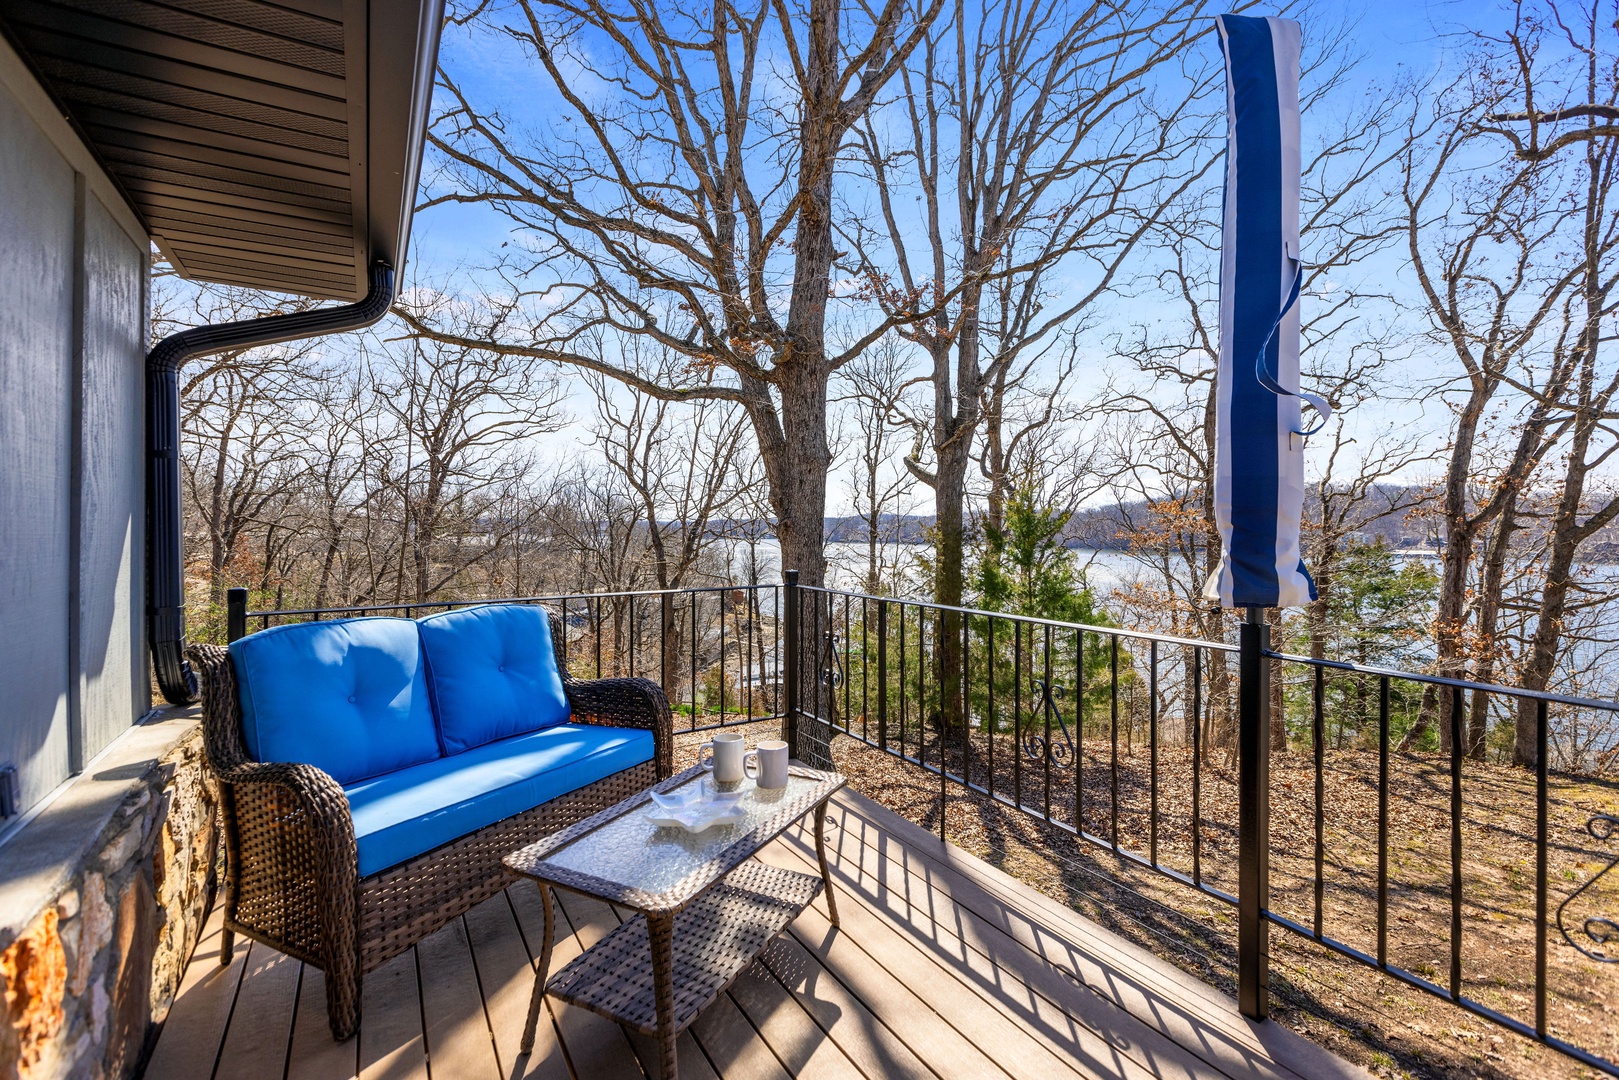 Unwind on the private deck, embracing spectacular views